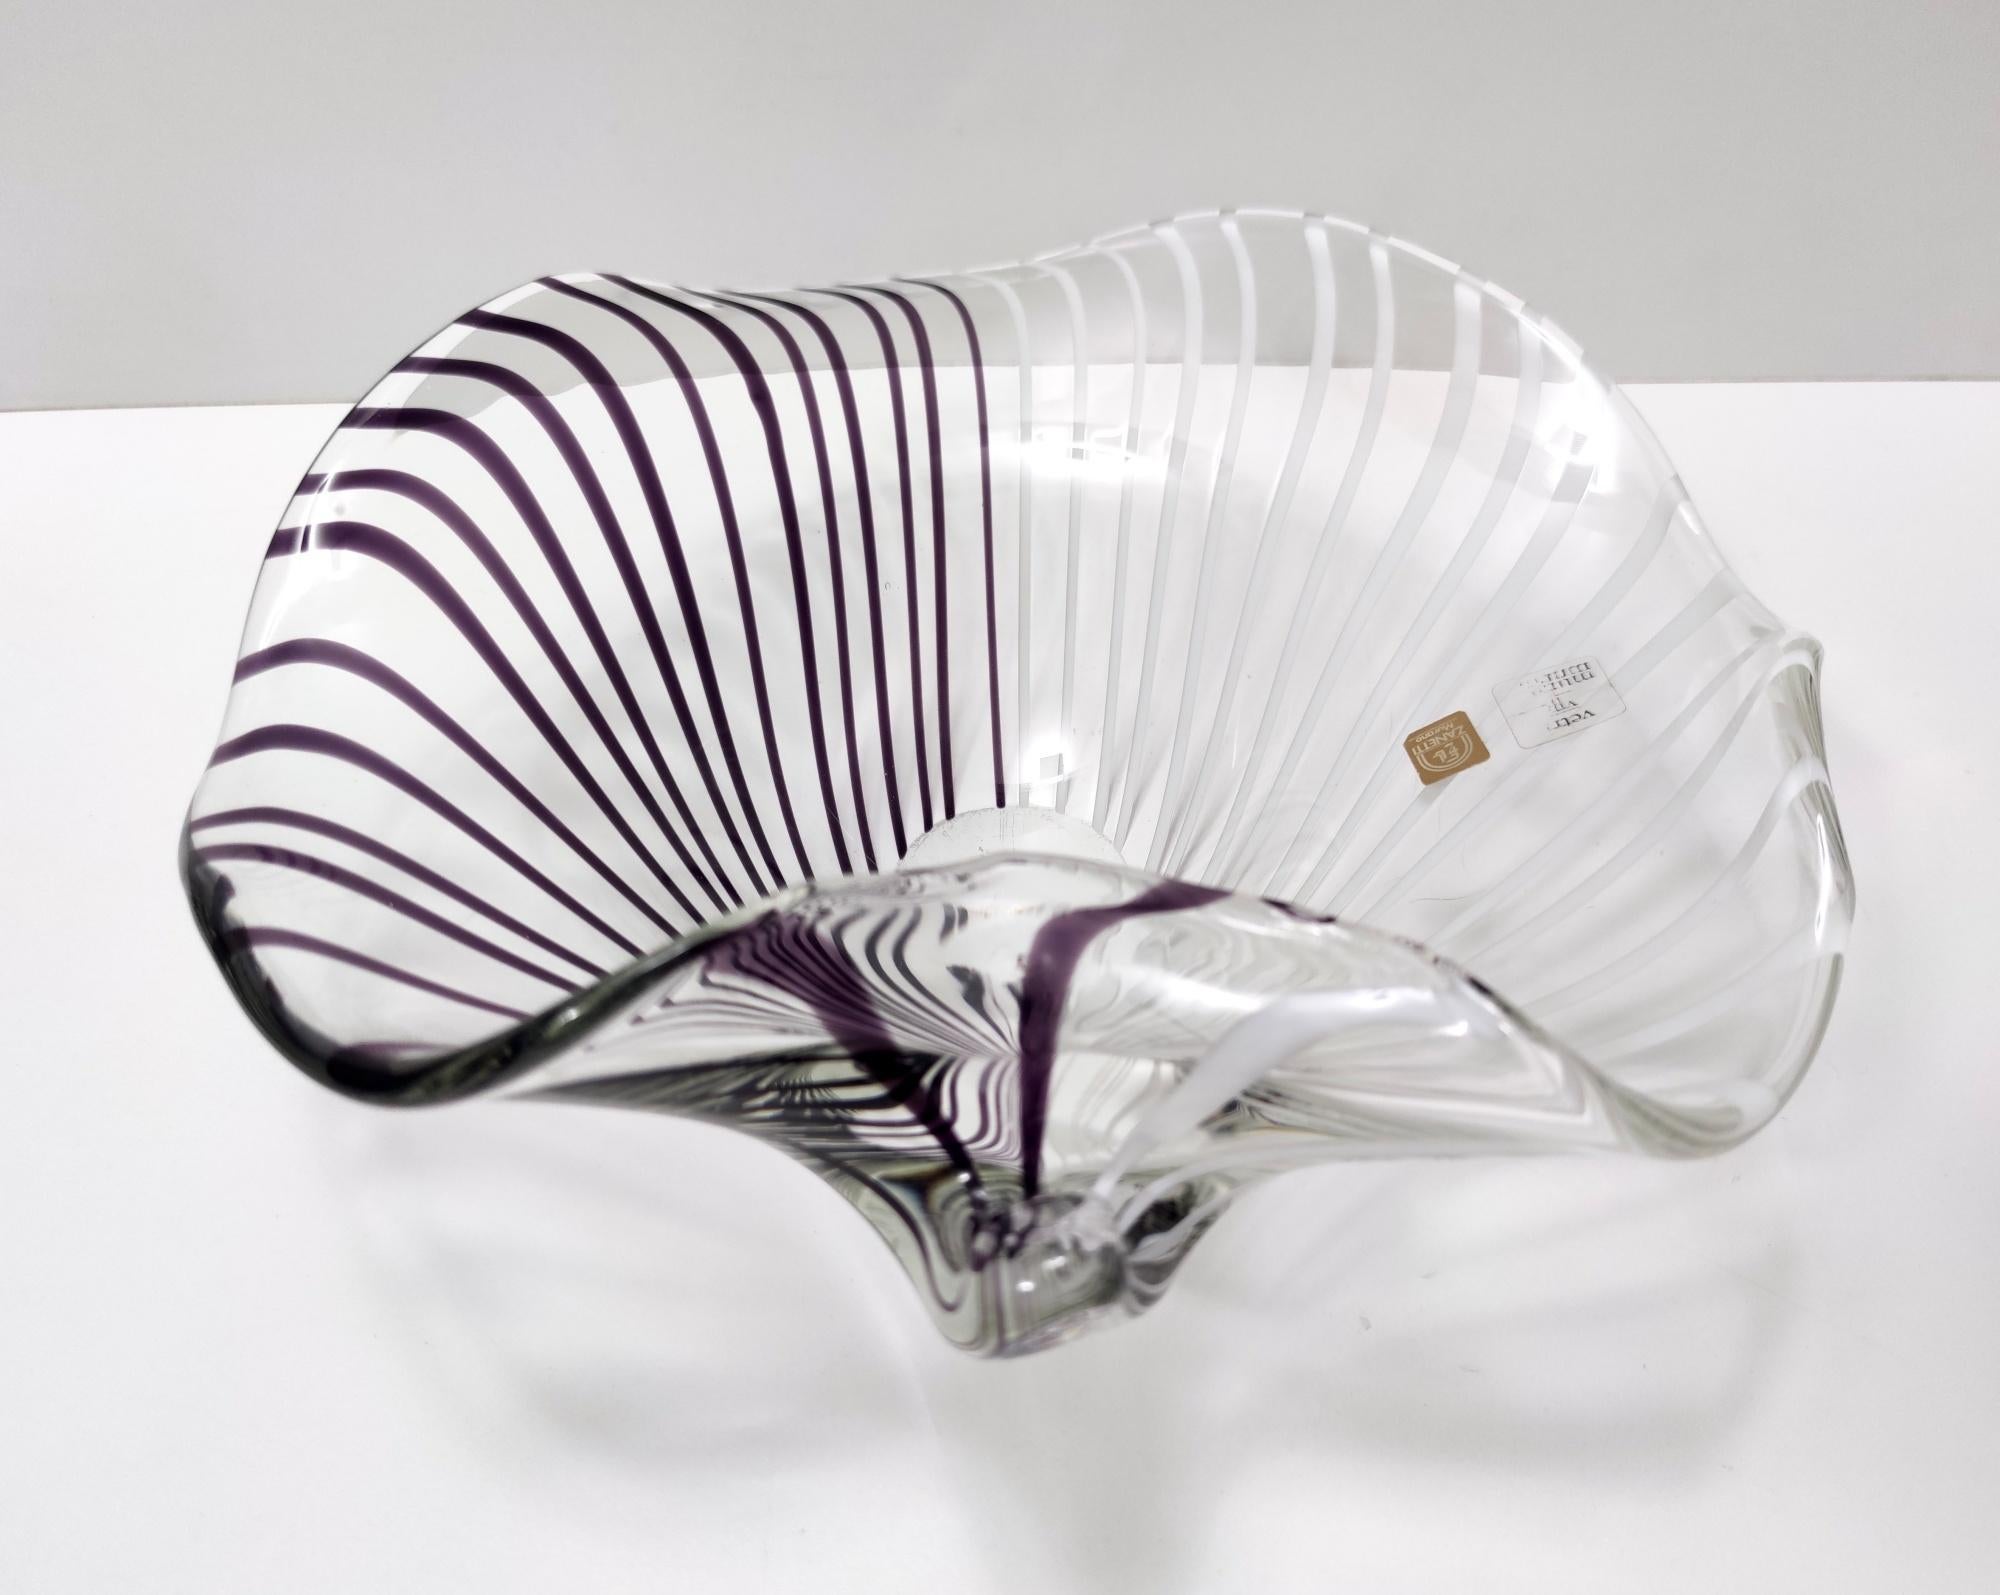 Mid-20th Century Large Vintage Murano Glass Centerpiece Bowl or Vide-Poche by Zanetti, Italy